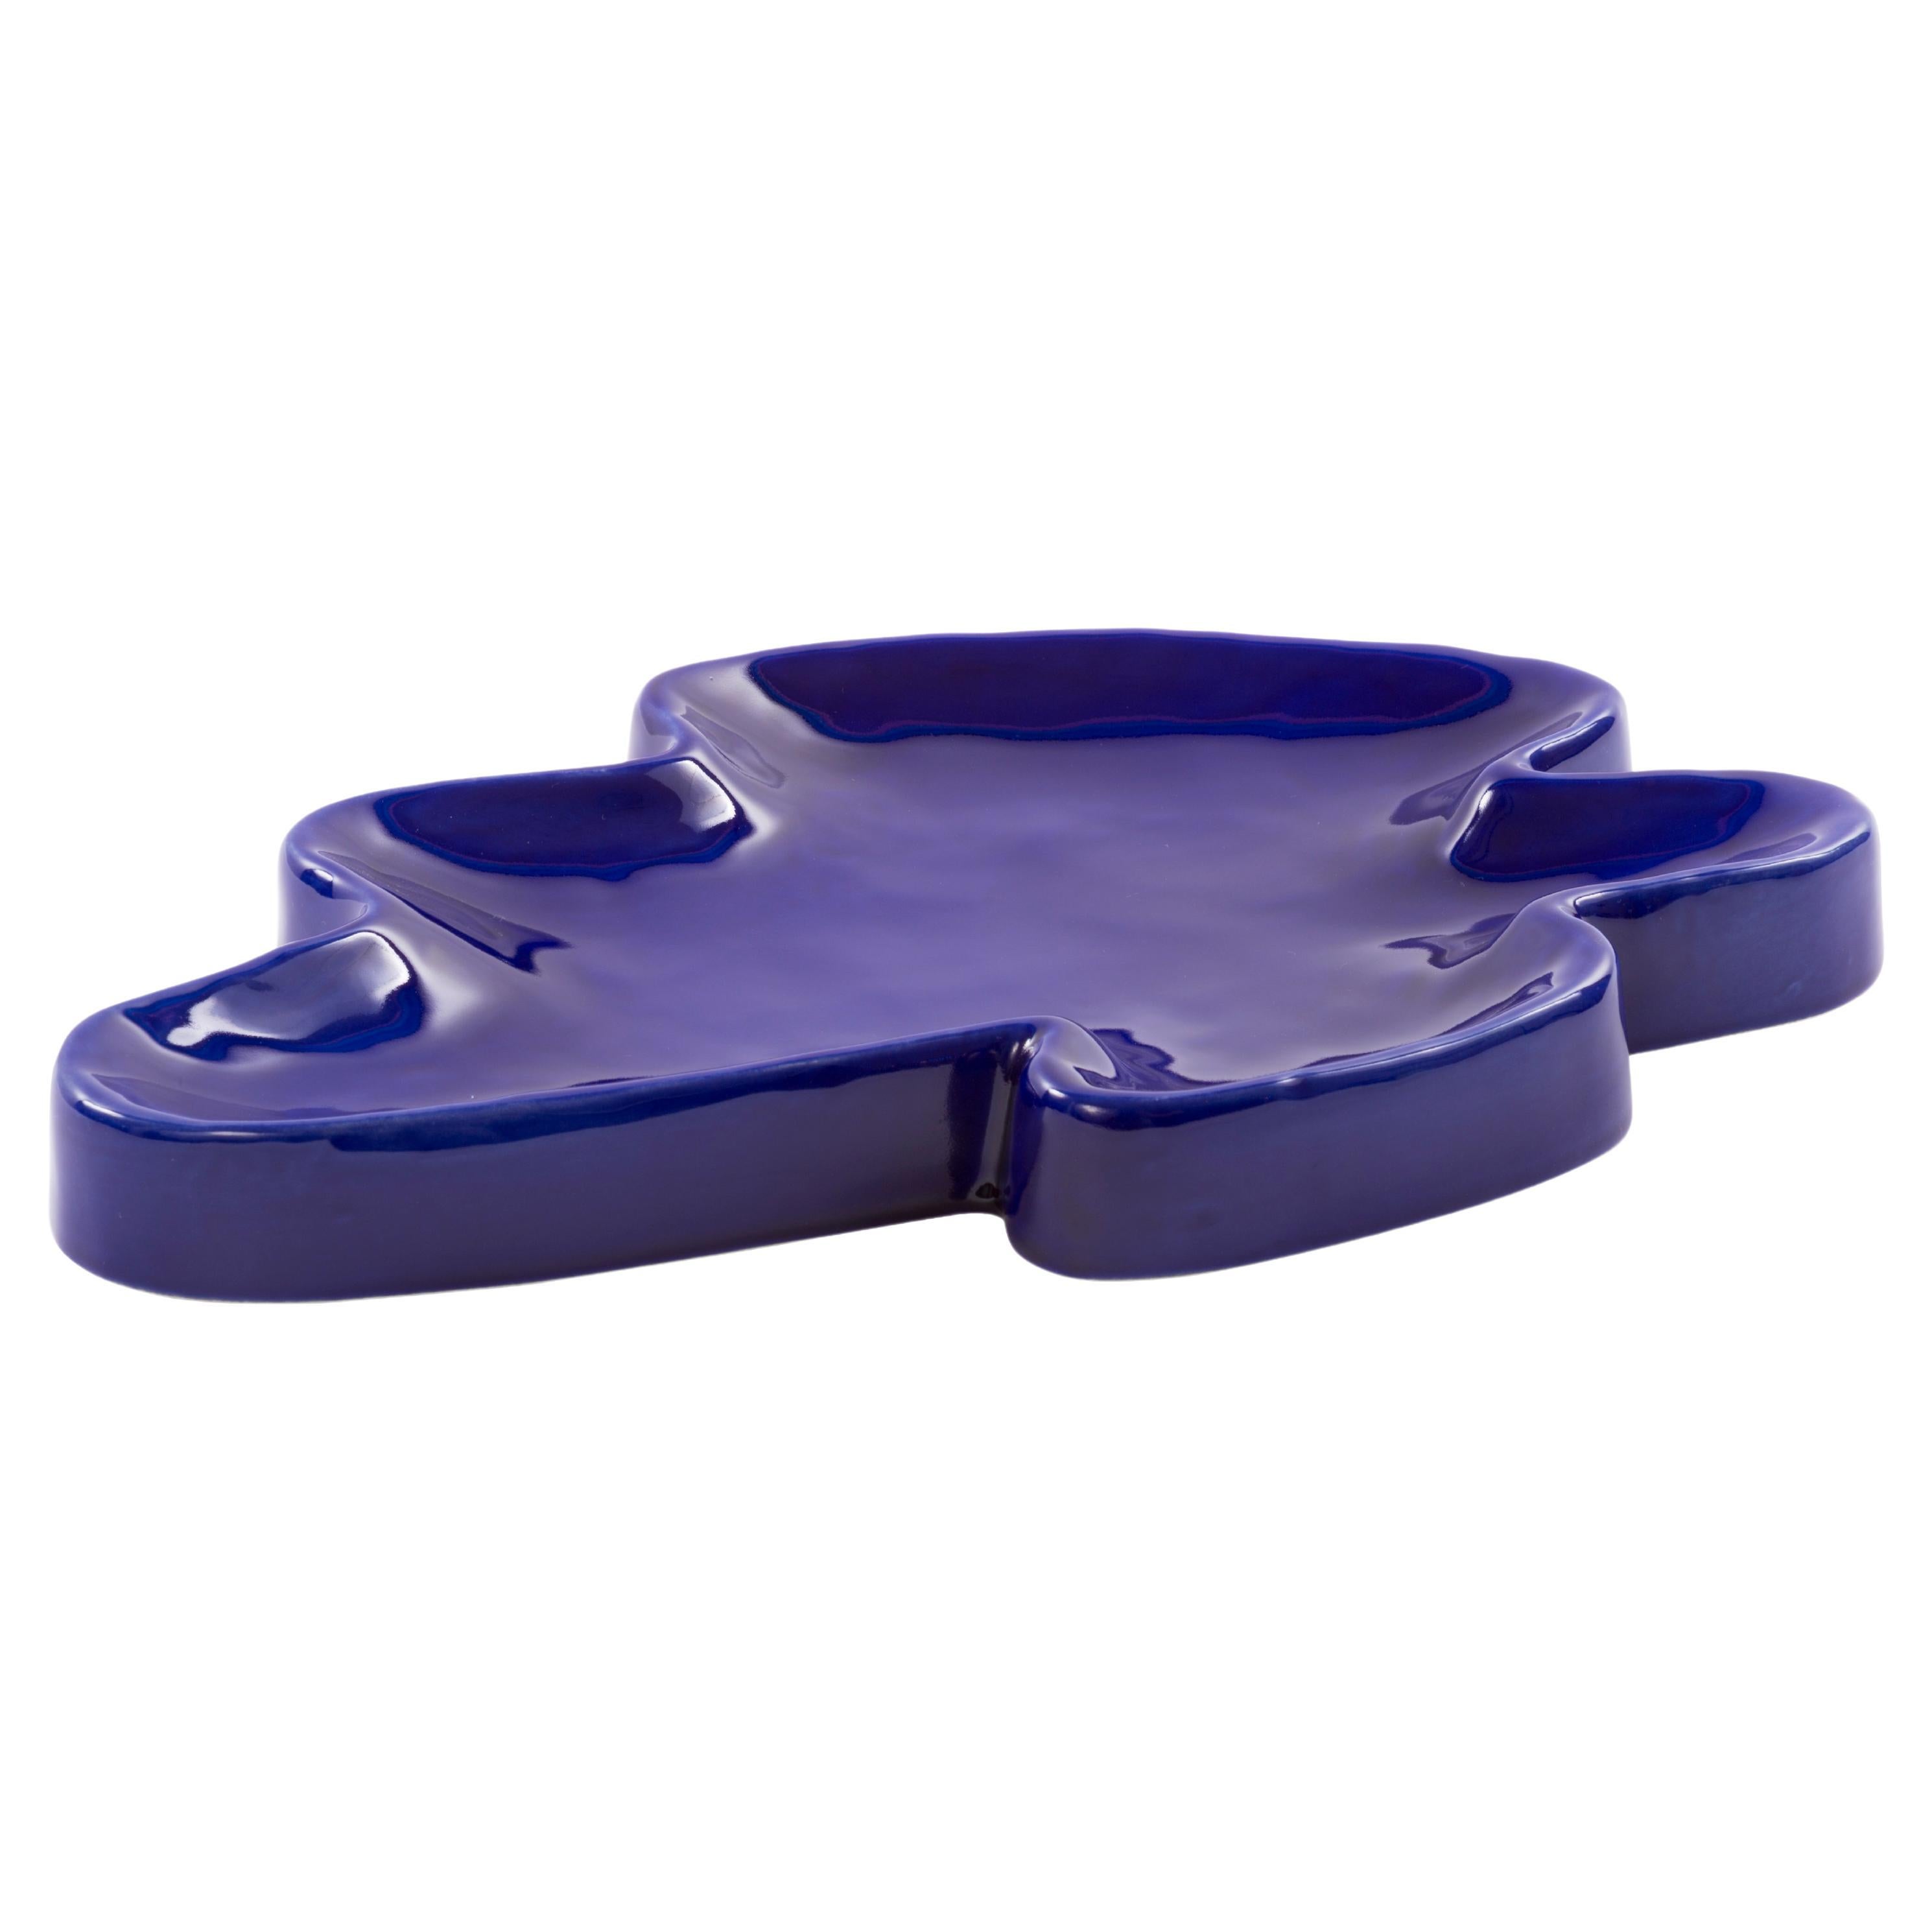 Lake Big Cobalt Tray by Pulpo For Sale